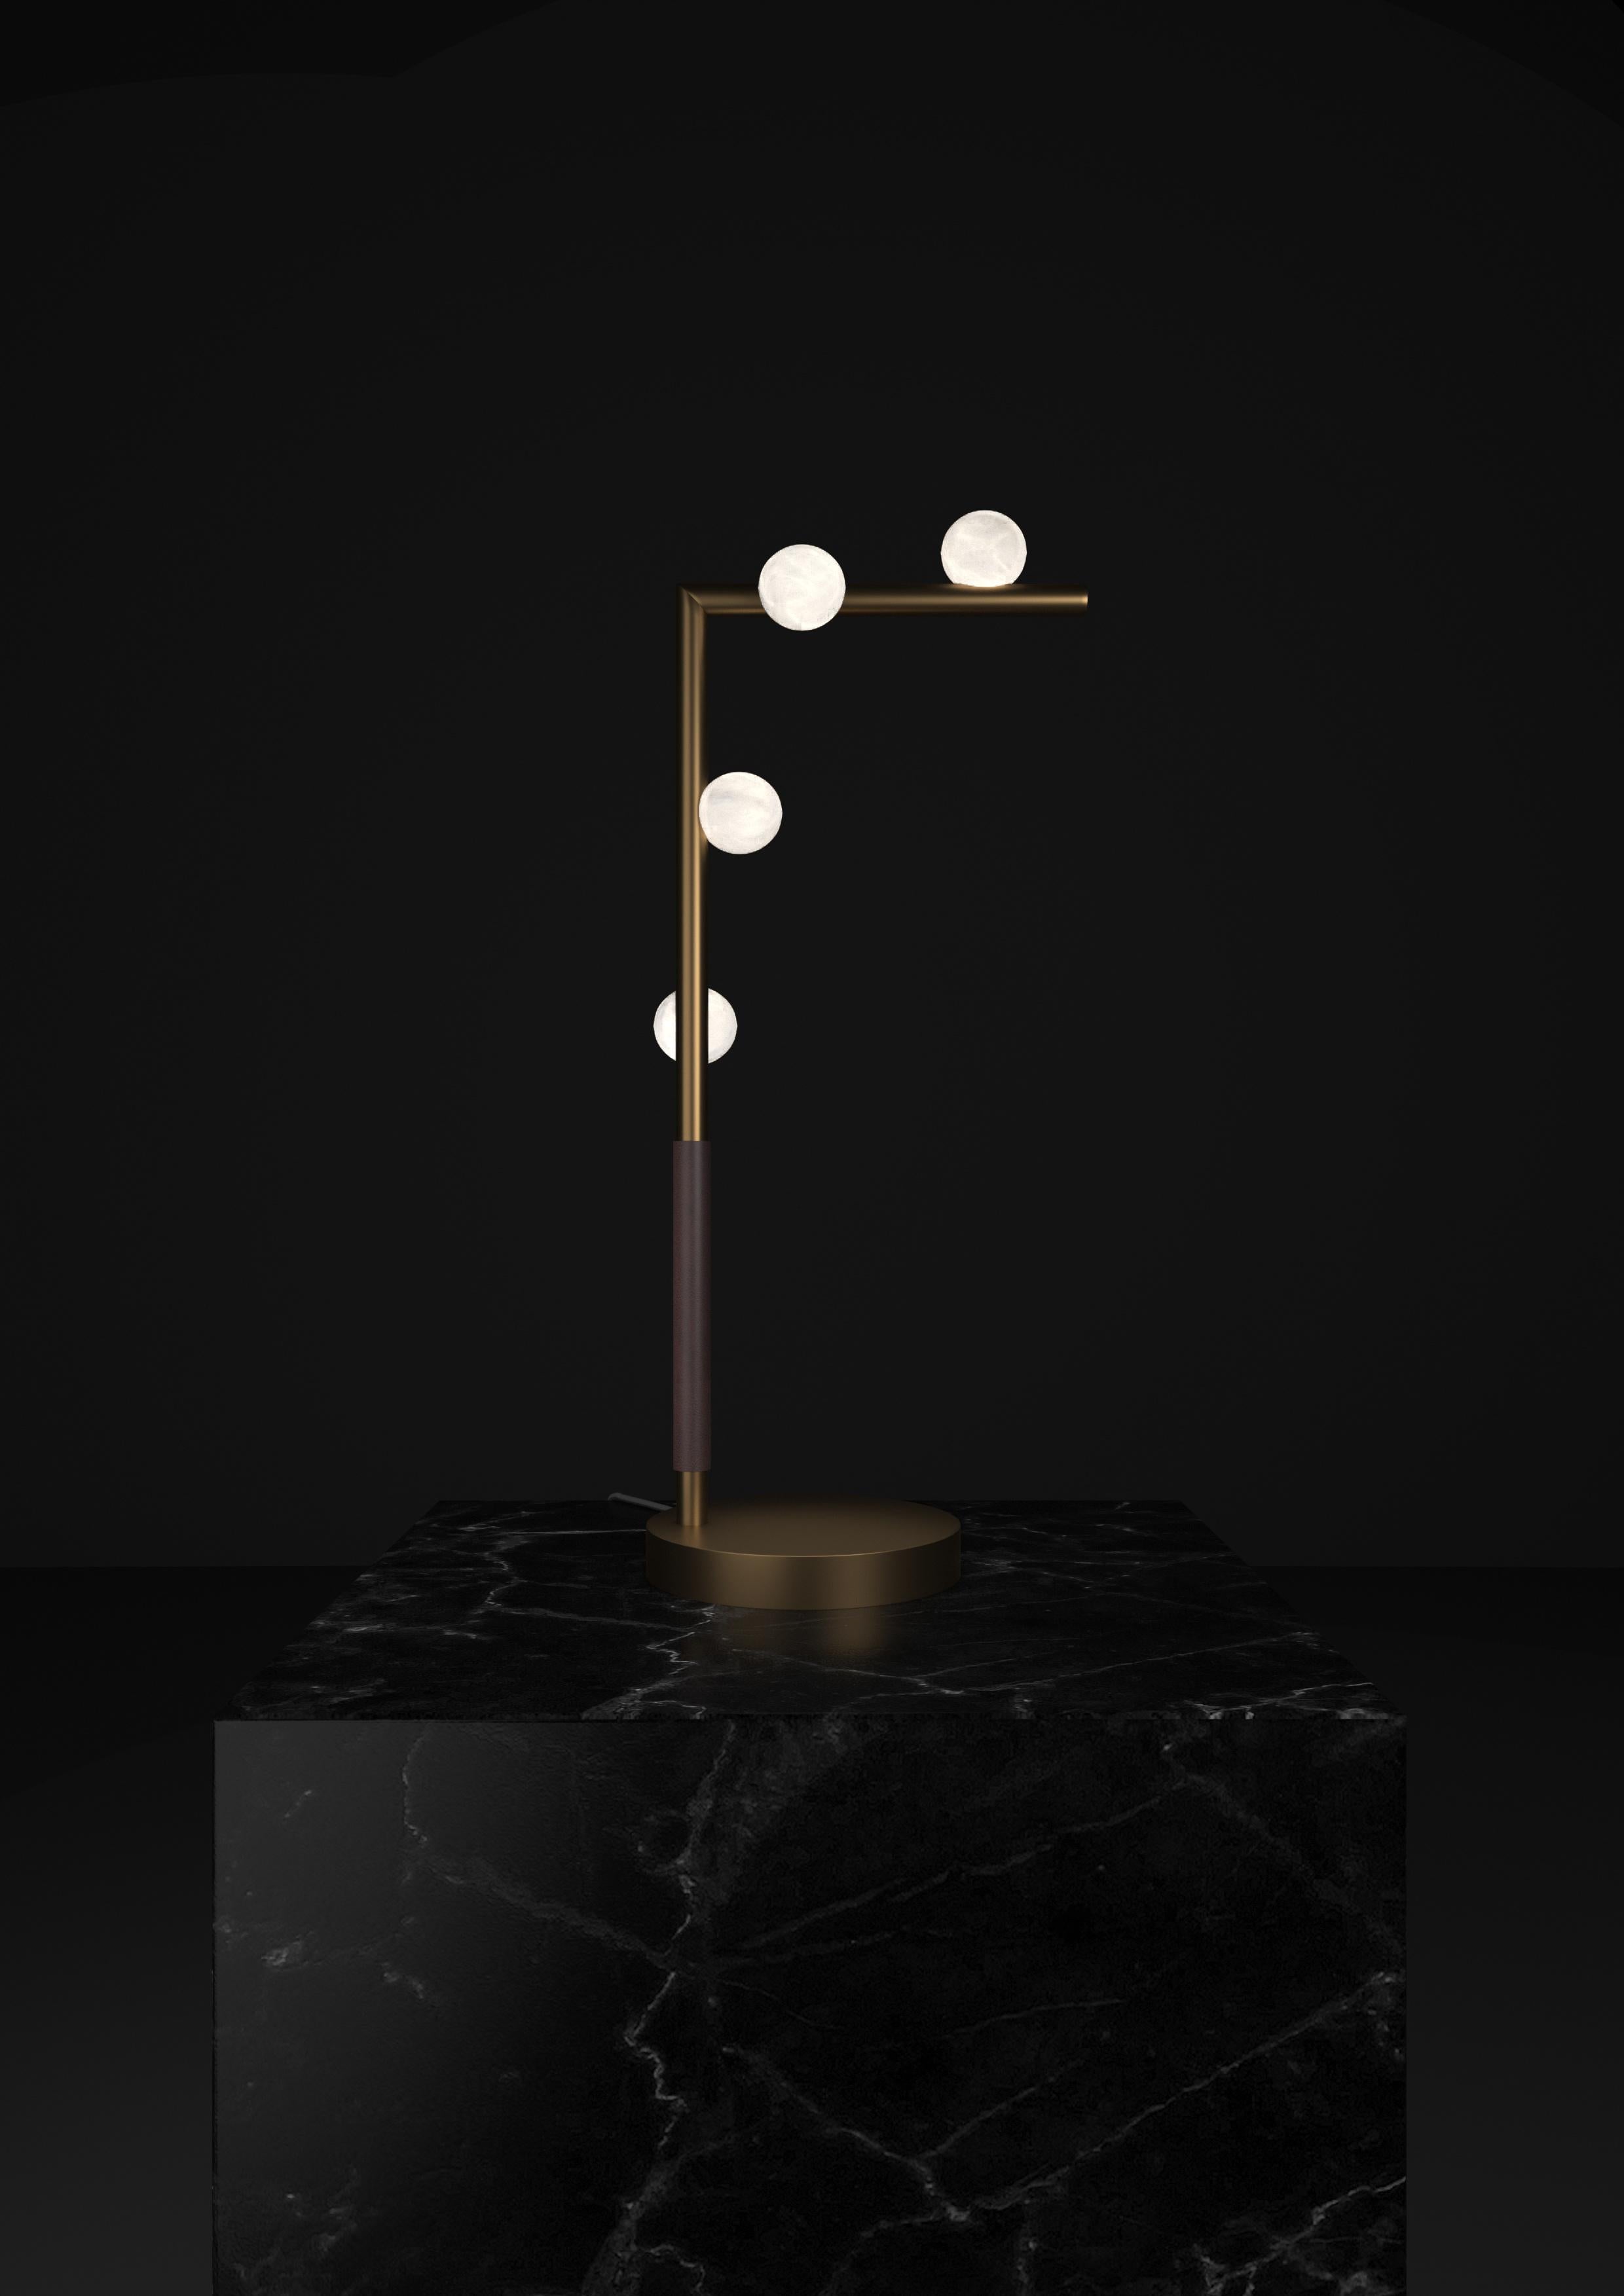 Demetra Bronze Table Lamp by Alabastro Italiano
Dimensions: D 20 x W 35 x H 67 cm.
Materials: White alabaster, bronze and leather.

Available in different finishes: Shiny Silver, Bronze, Brushed Brass, Ruggine of Florence, Brushed Burnished, Shiny